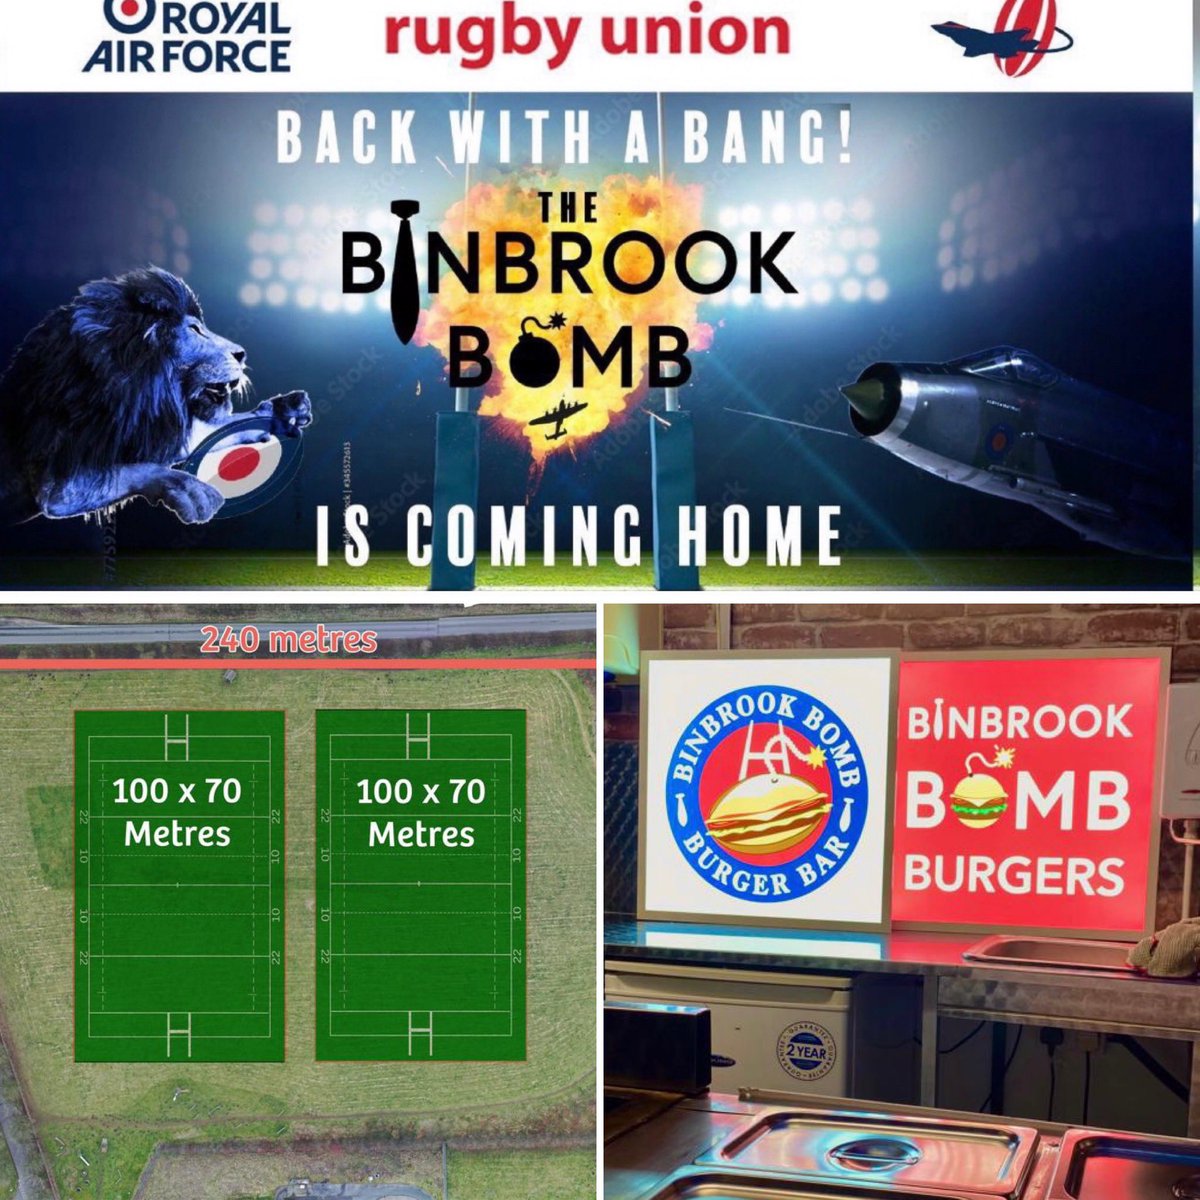 Great to be at former RAF Binbrook today as we continue to plan for the @RAFRugbyUnion Binbrook Bomb to be held on Wed 7 June 23. This will be a truly great event with teams from across the @RoyalAirForce and plenty of associated entertainment! Stay connected for more info!